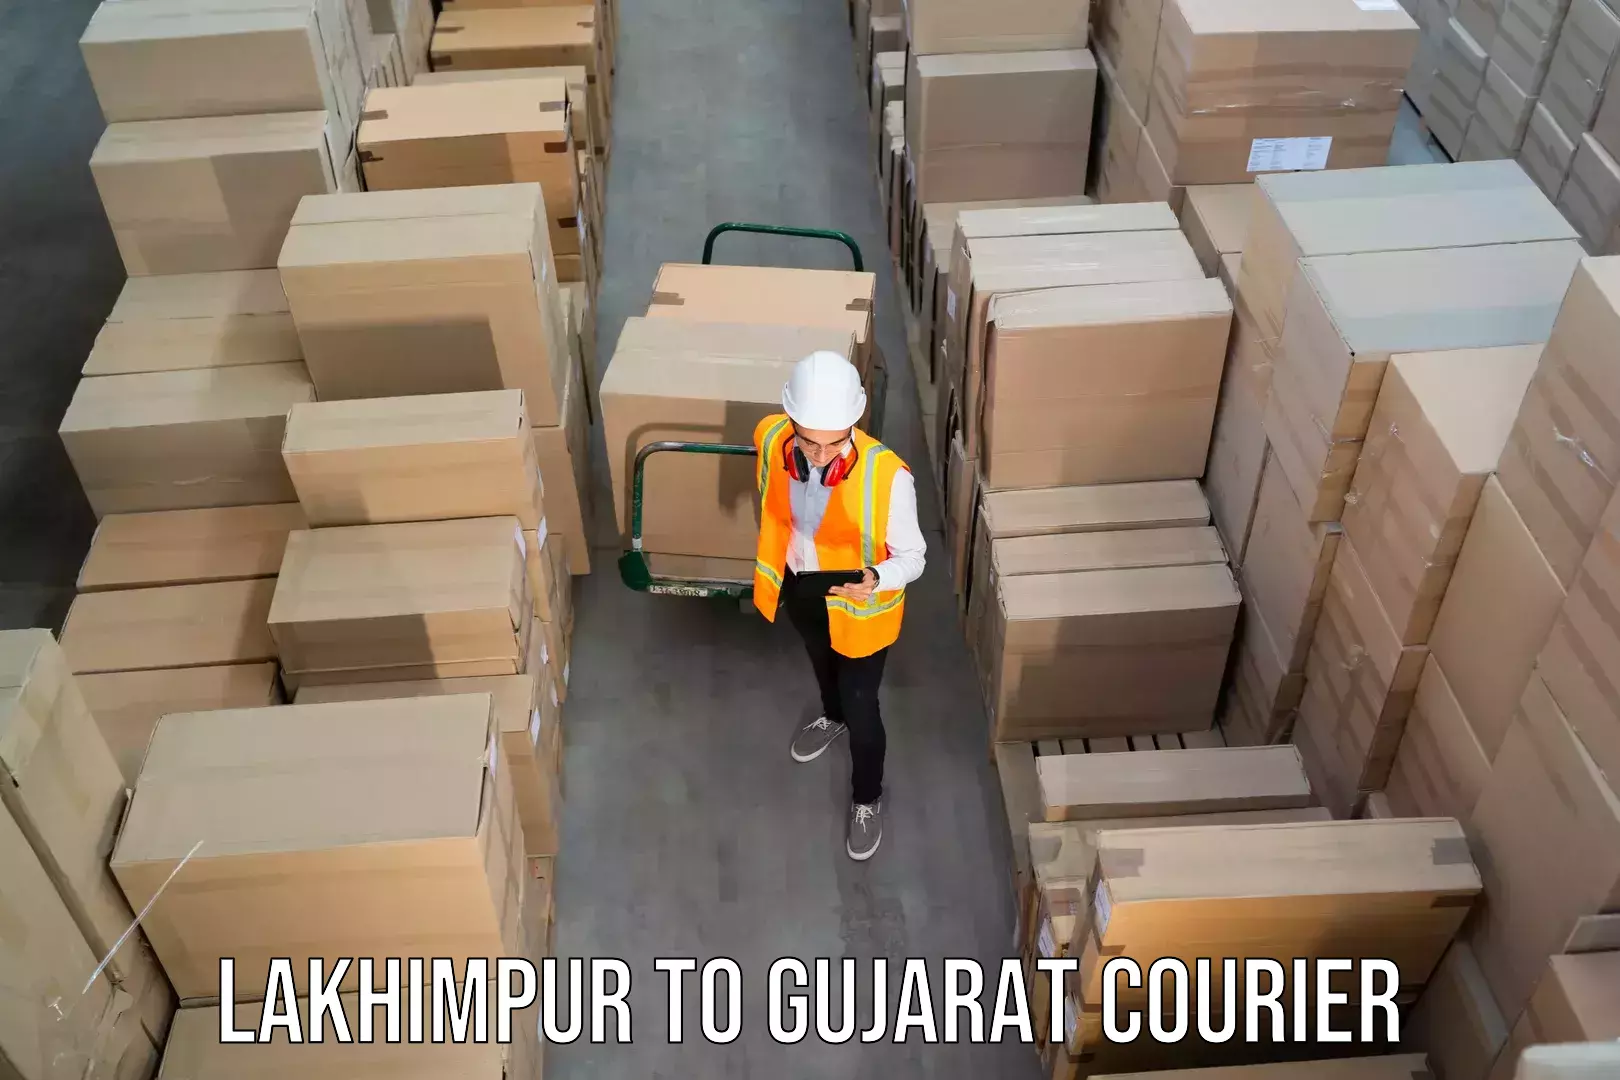 State-of-the-art courier technology Lakhimpur to Radhanpur